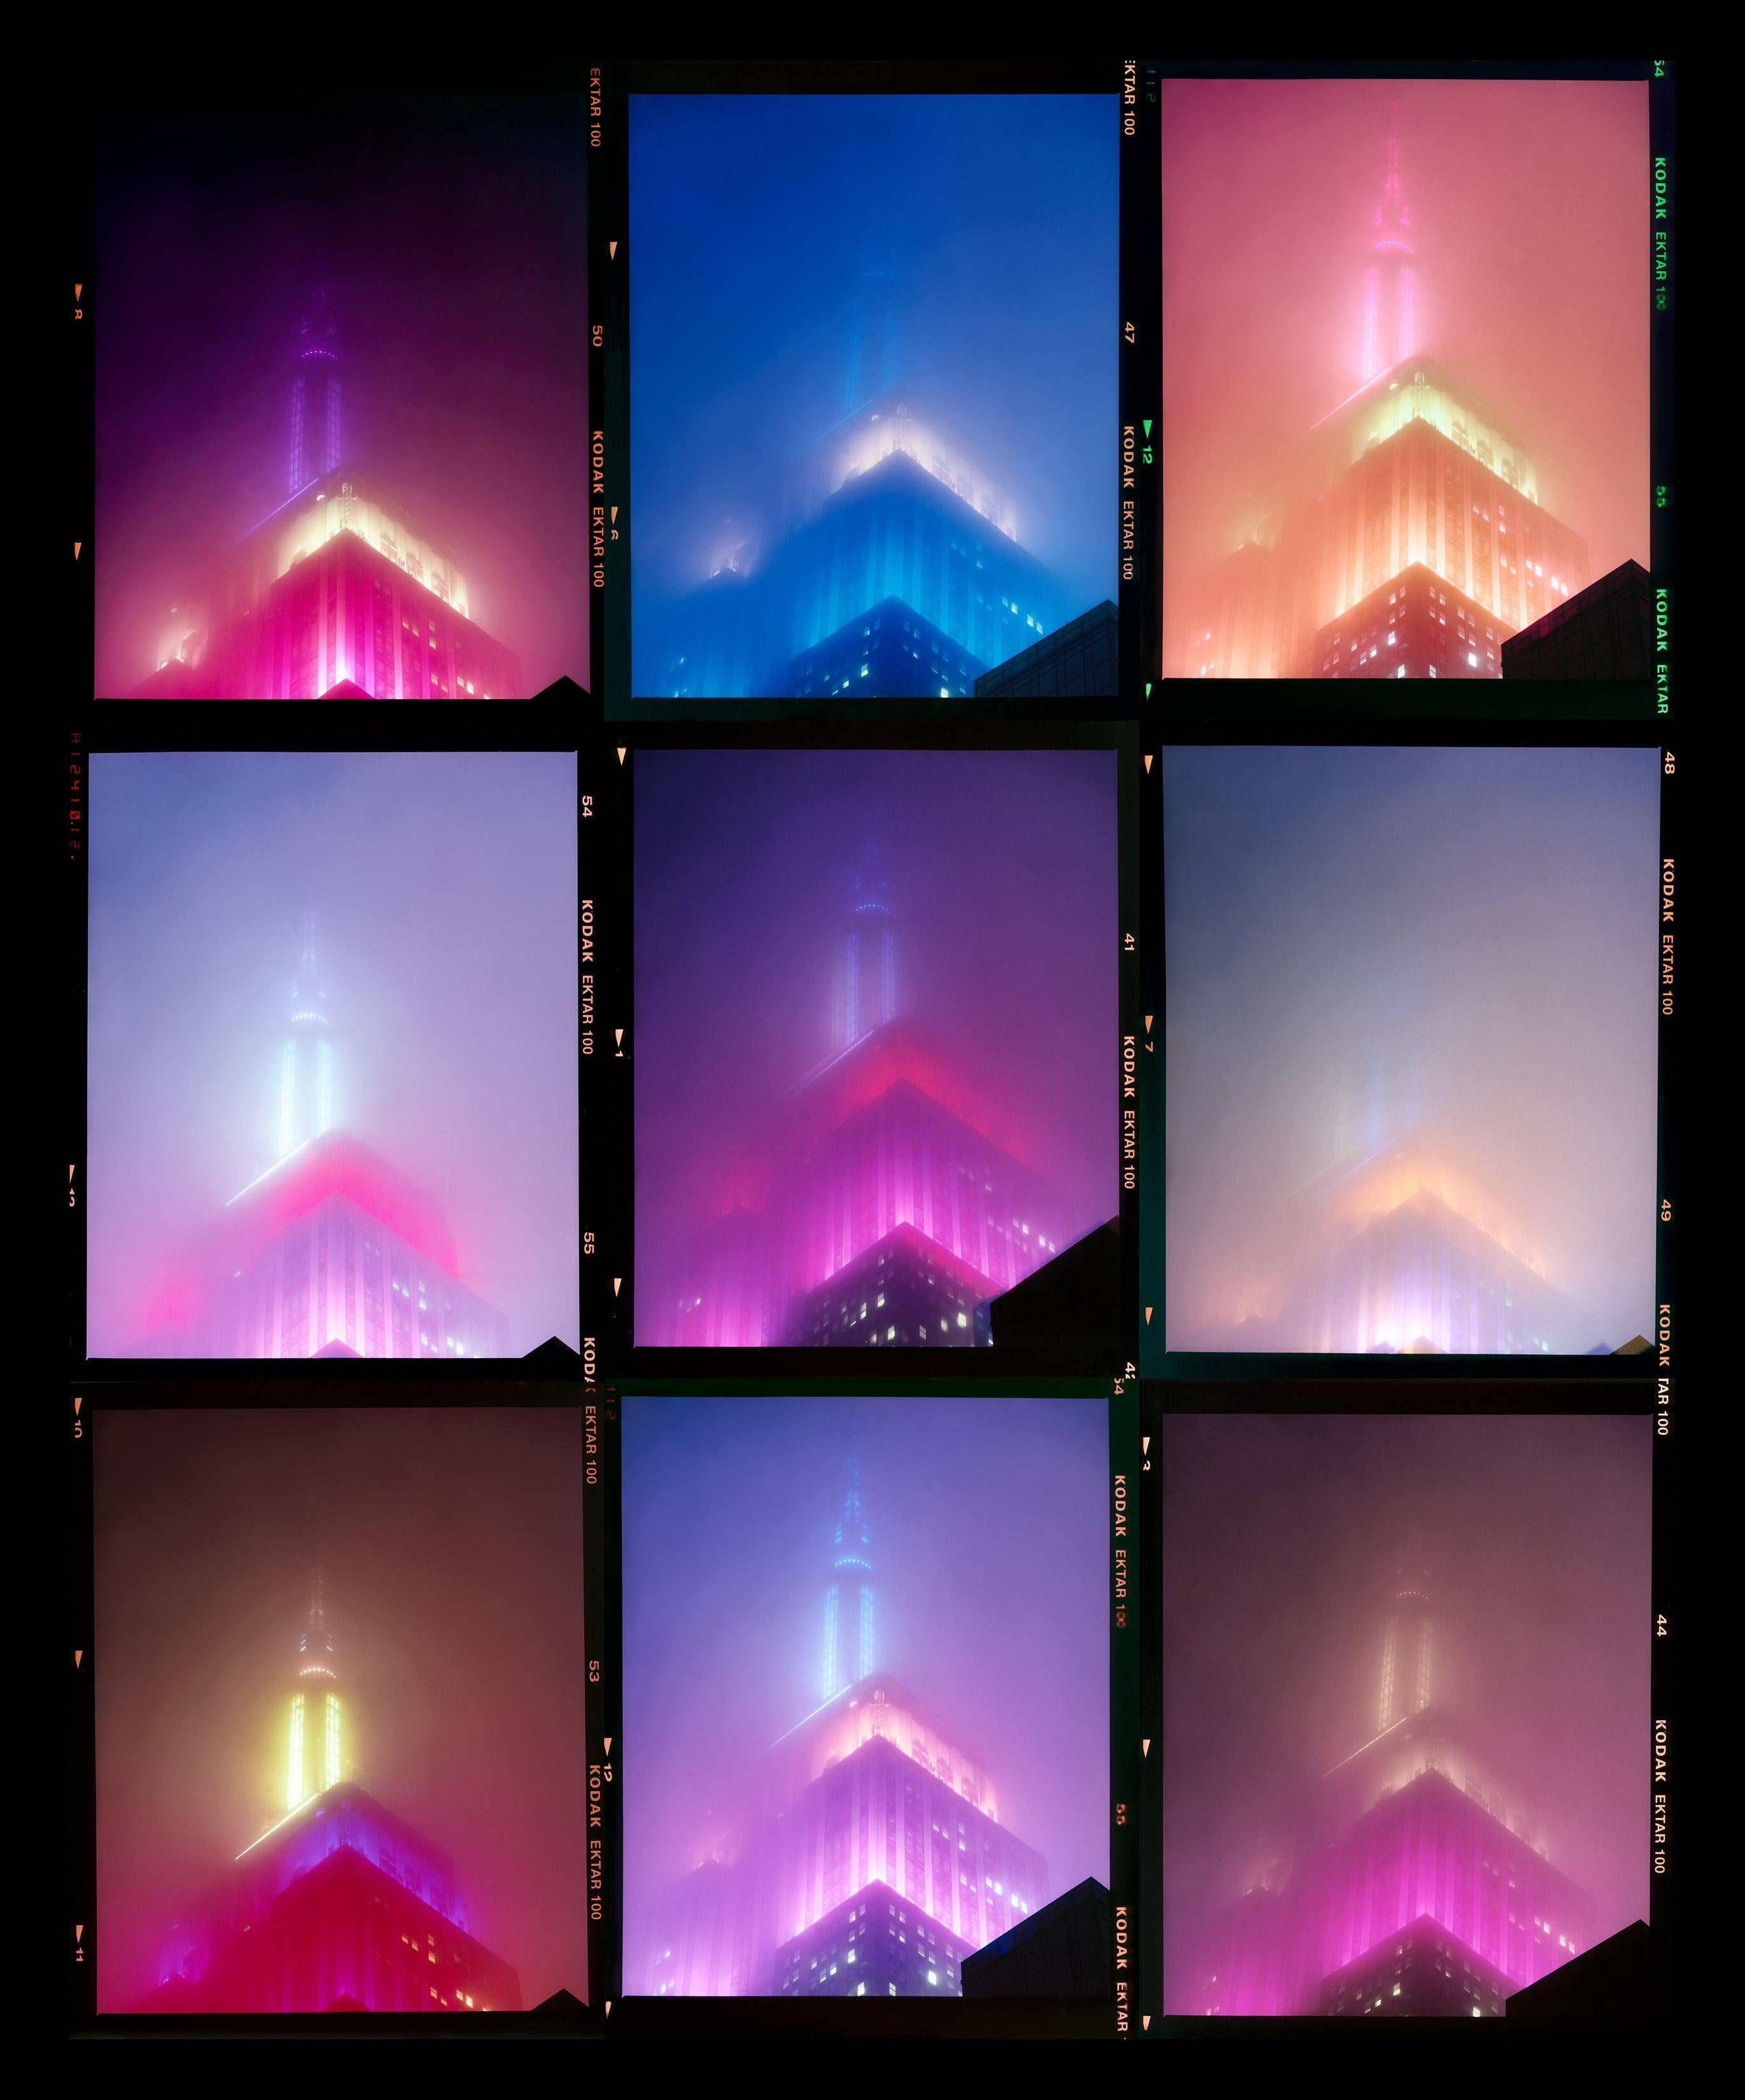 'NOMAD (Mosaic)', New York. Richard Heeps has photographed the iconic Empire State building in the mist. The NOMAD sequence of photographs capture the art deco architecture illuminated by changing colours, and is part of Richard's street photography